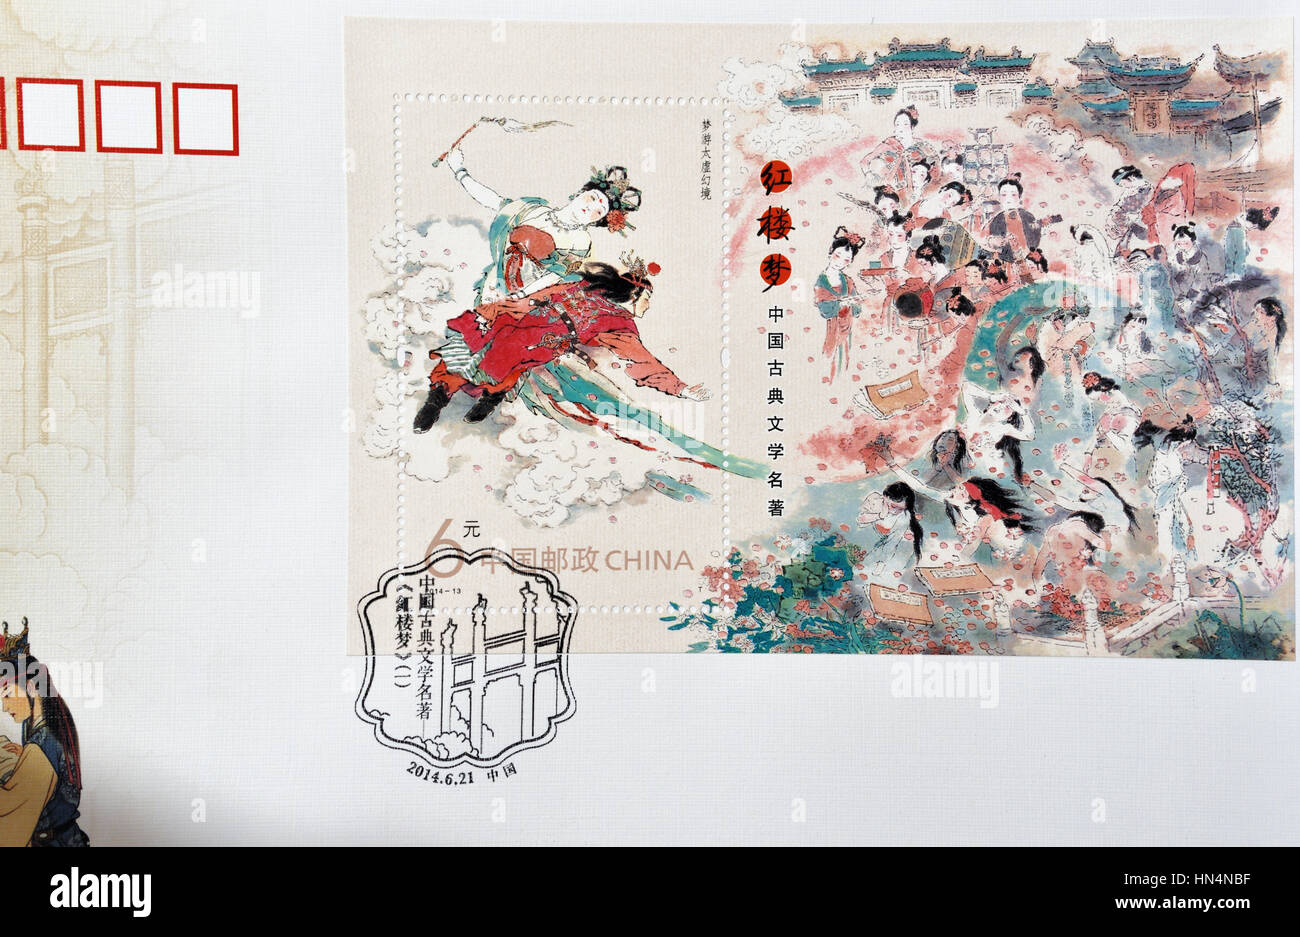 CHINA - CIRCA 2014: A stamp printed in China shows 2014-13 Dream of Red Chamber Masterpiece Classical Literature. circa 2014. Stock Photo